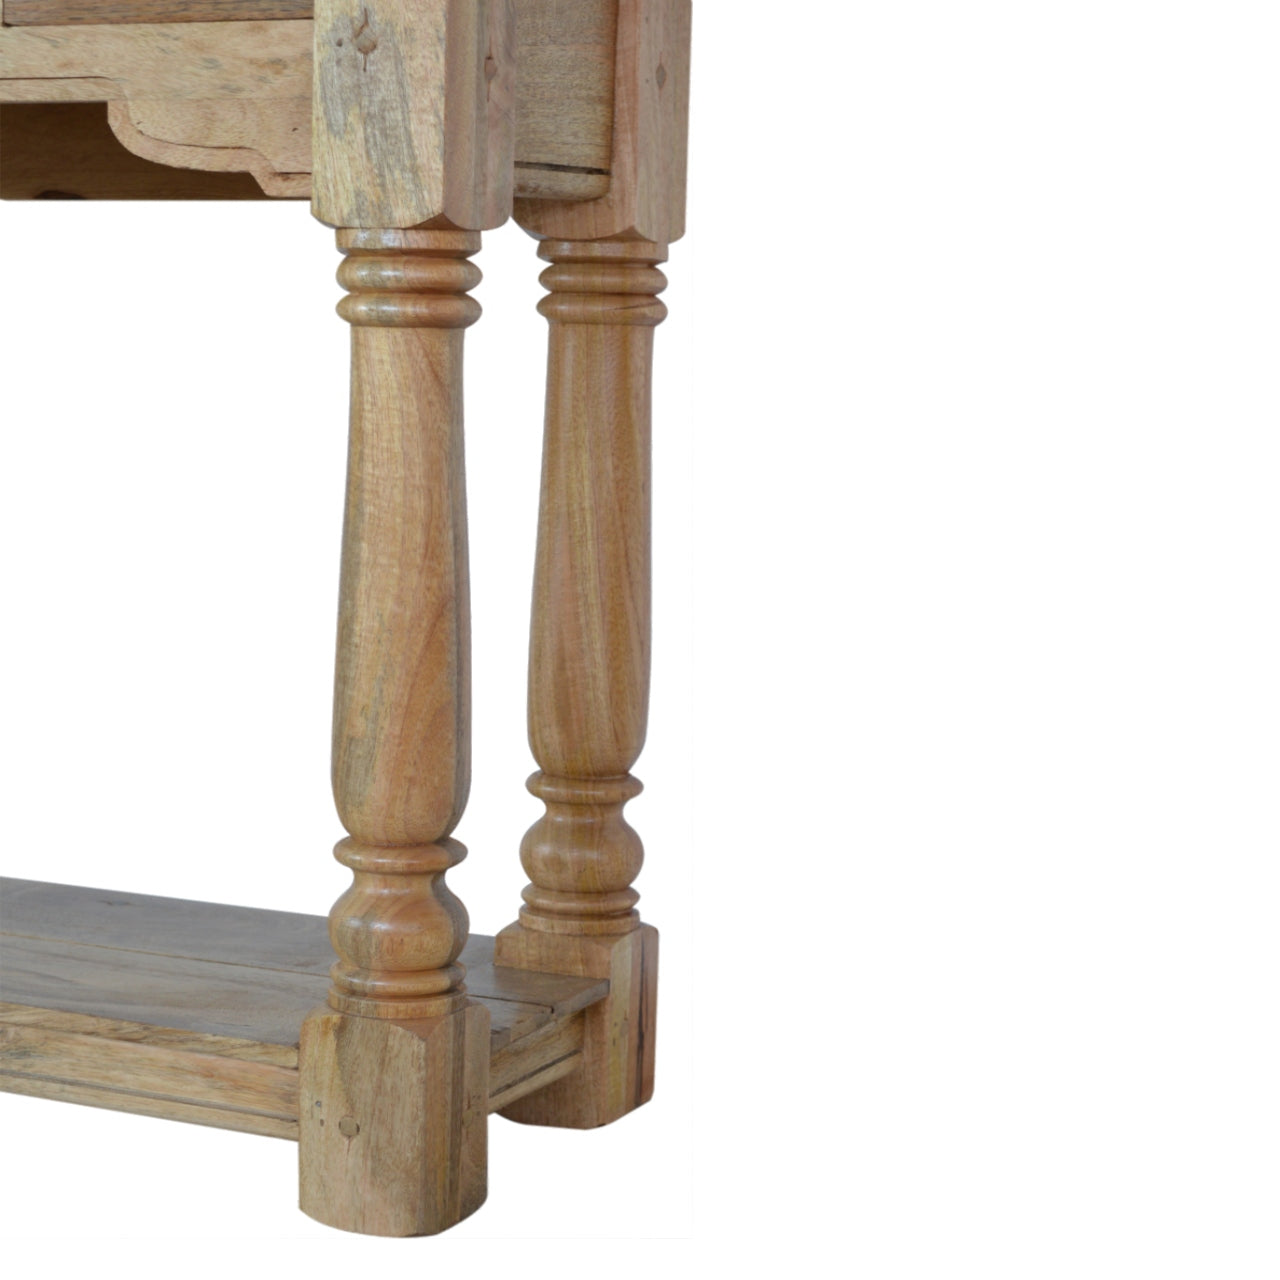 4 Drawer Console Table